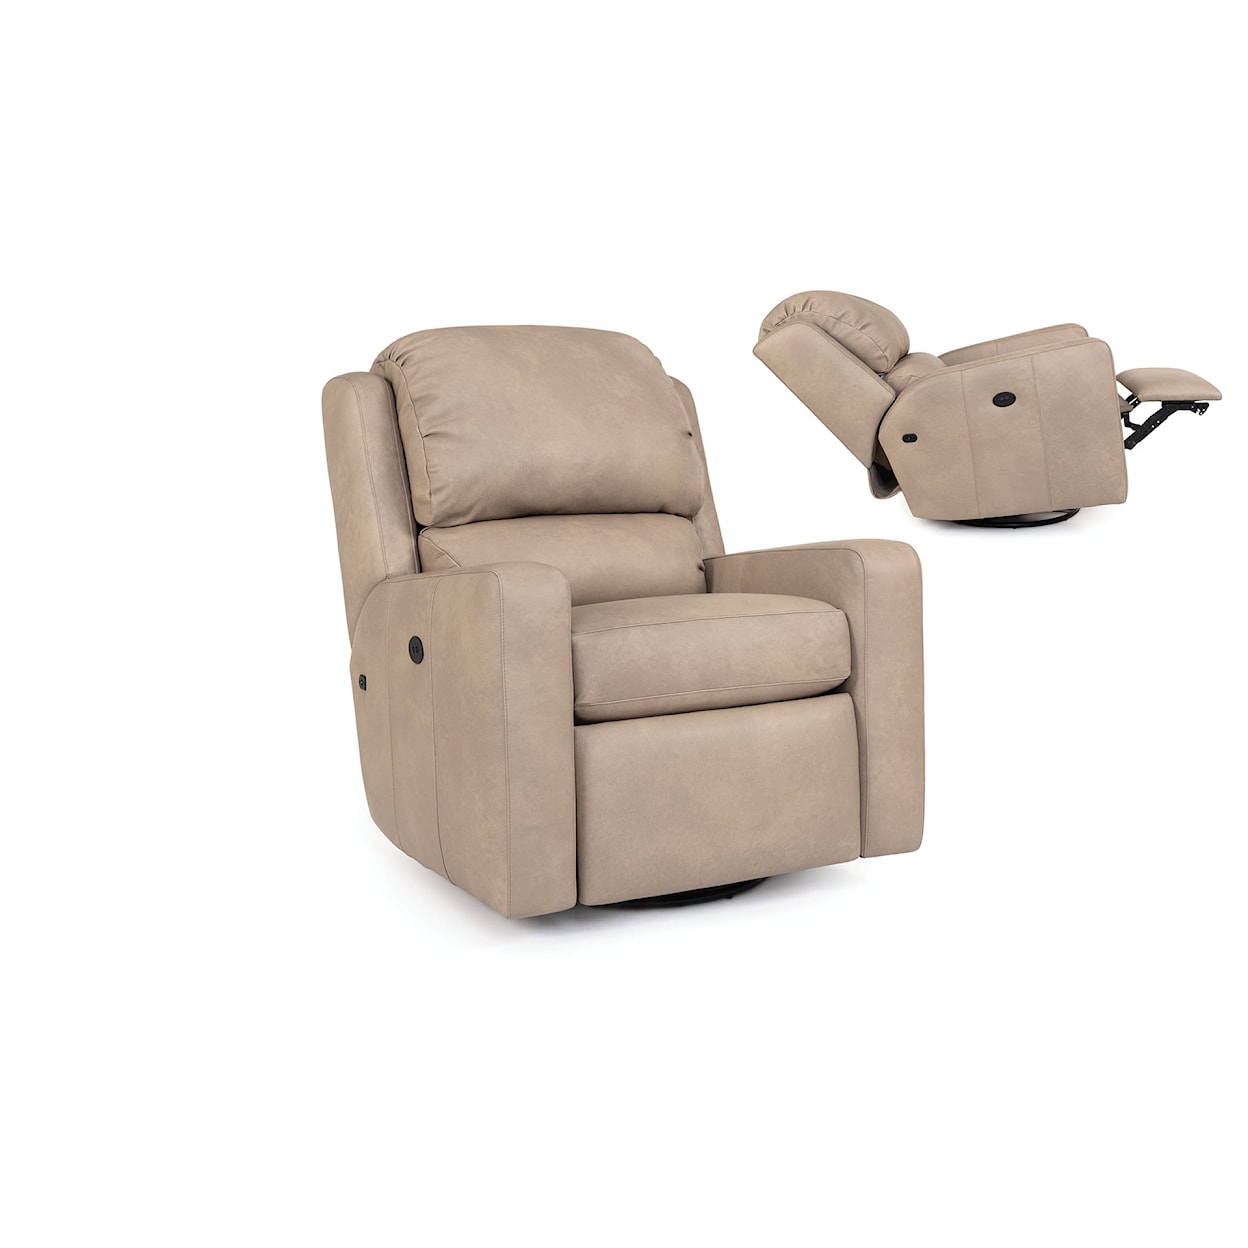 Smith Brothers 781 Swivel Glider Reclining Chair